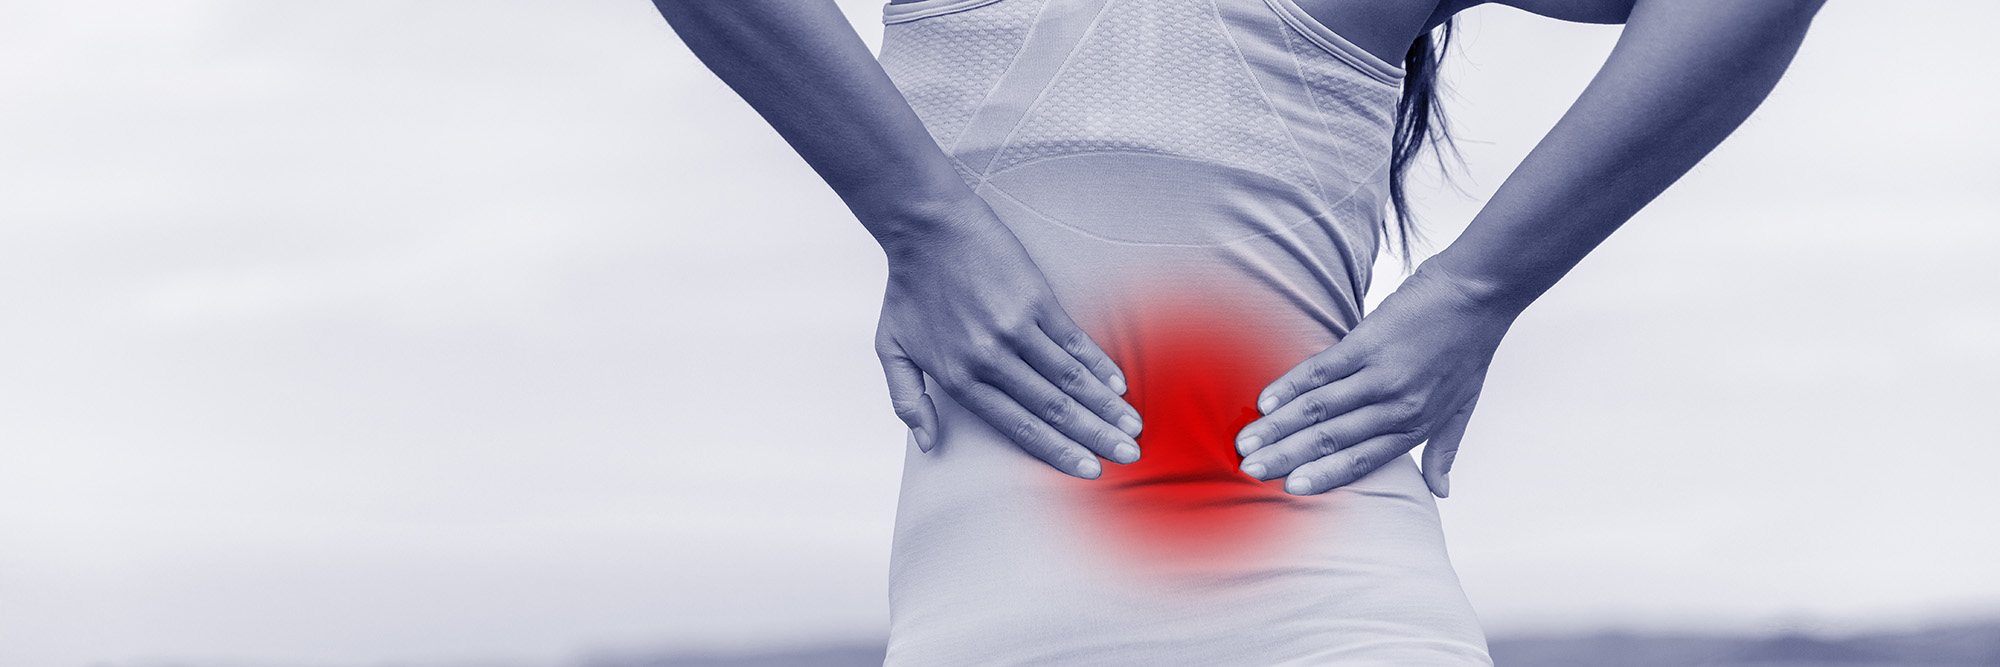 Back pain - woman having painful muscle injury in lower back. Fitness girl sport girl with sports injury outdoor. Blue filter with red zone circle showing the painful area.